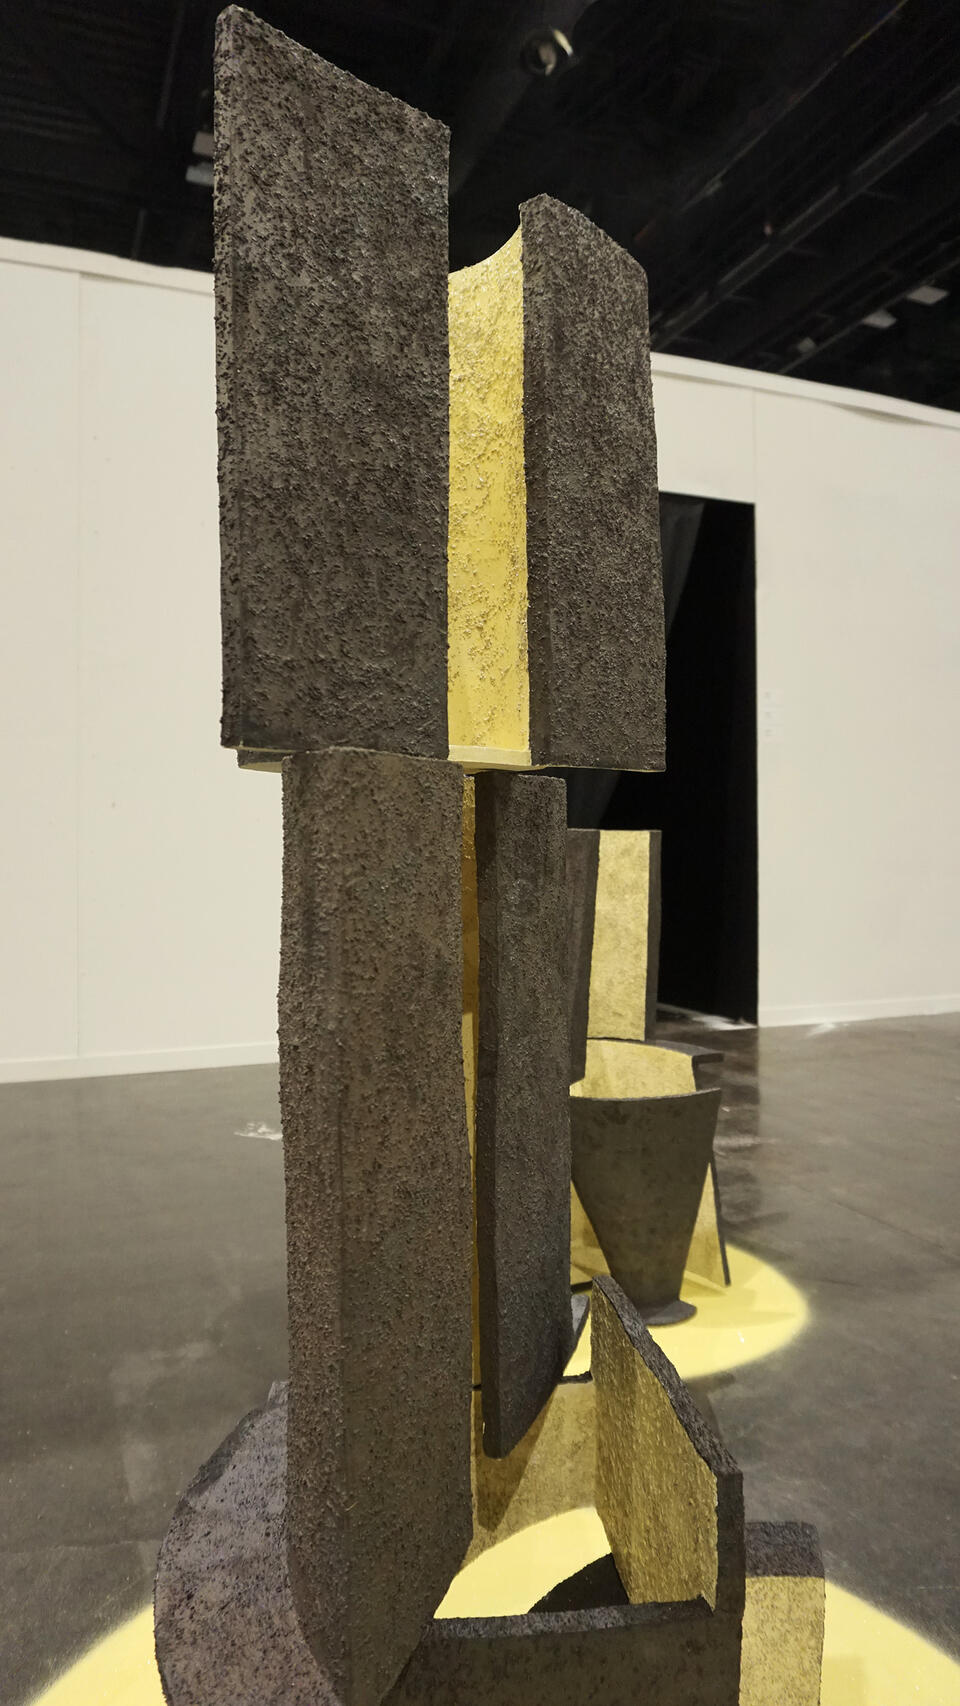 Close-up of a textured, geometric ceramic sculpture with vertical panels in black and yellow, displayed on a yellow circular base. The background shows additional sculptures with similar designs.